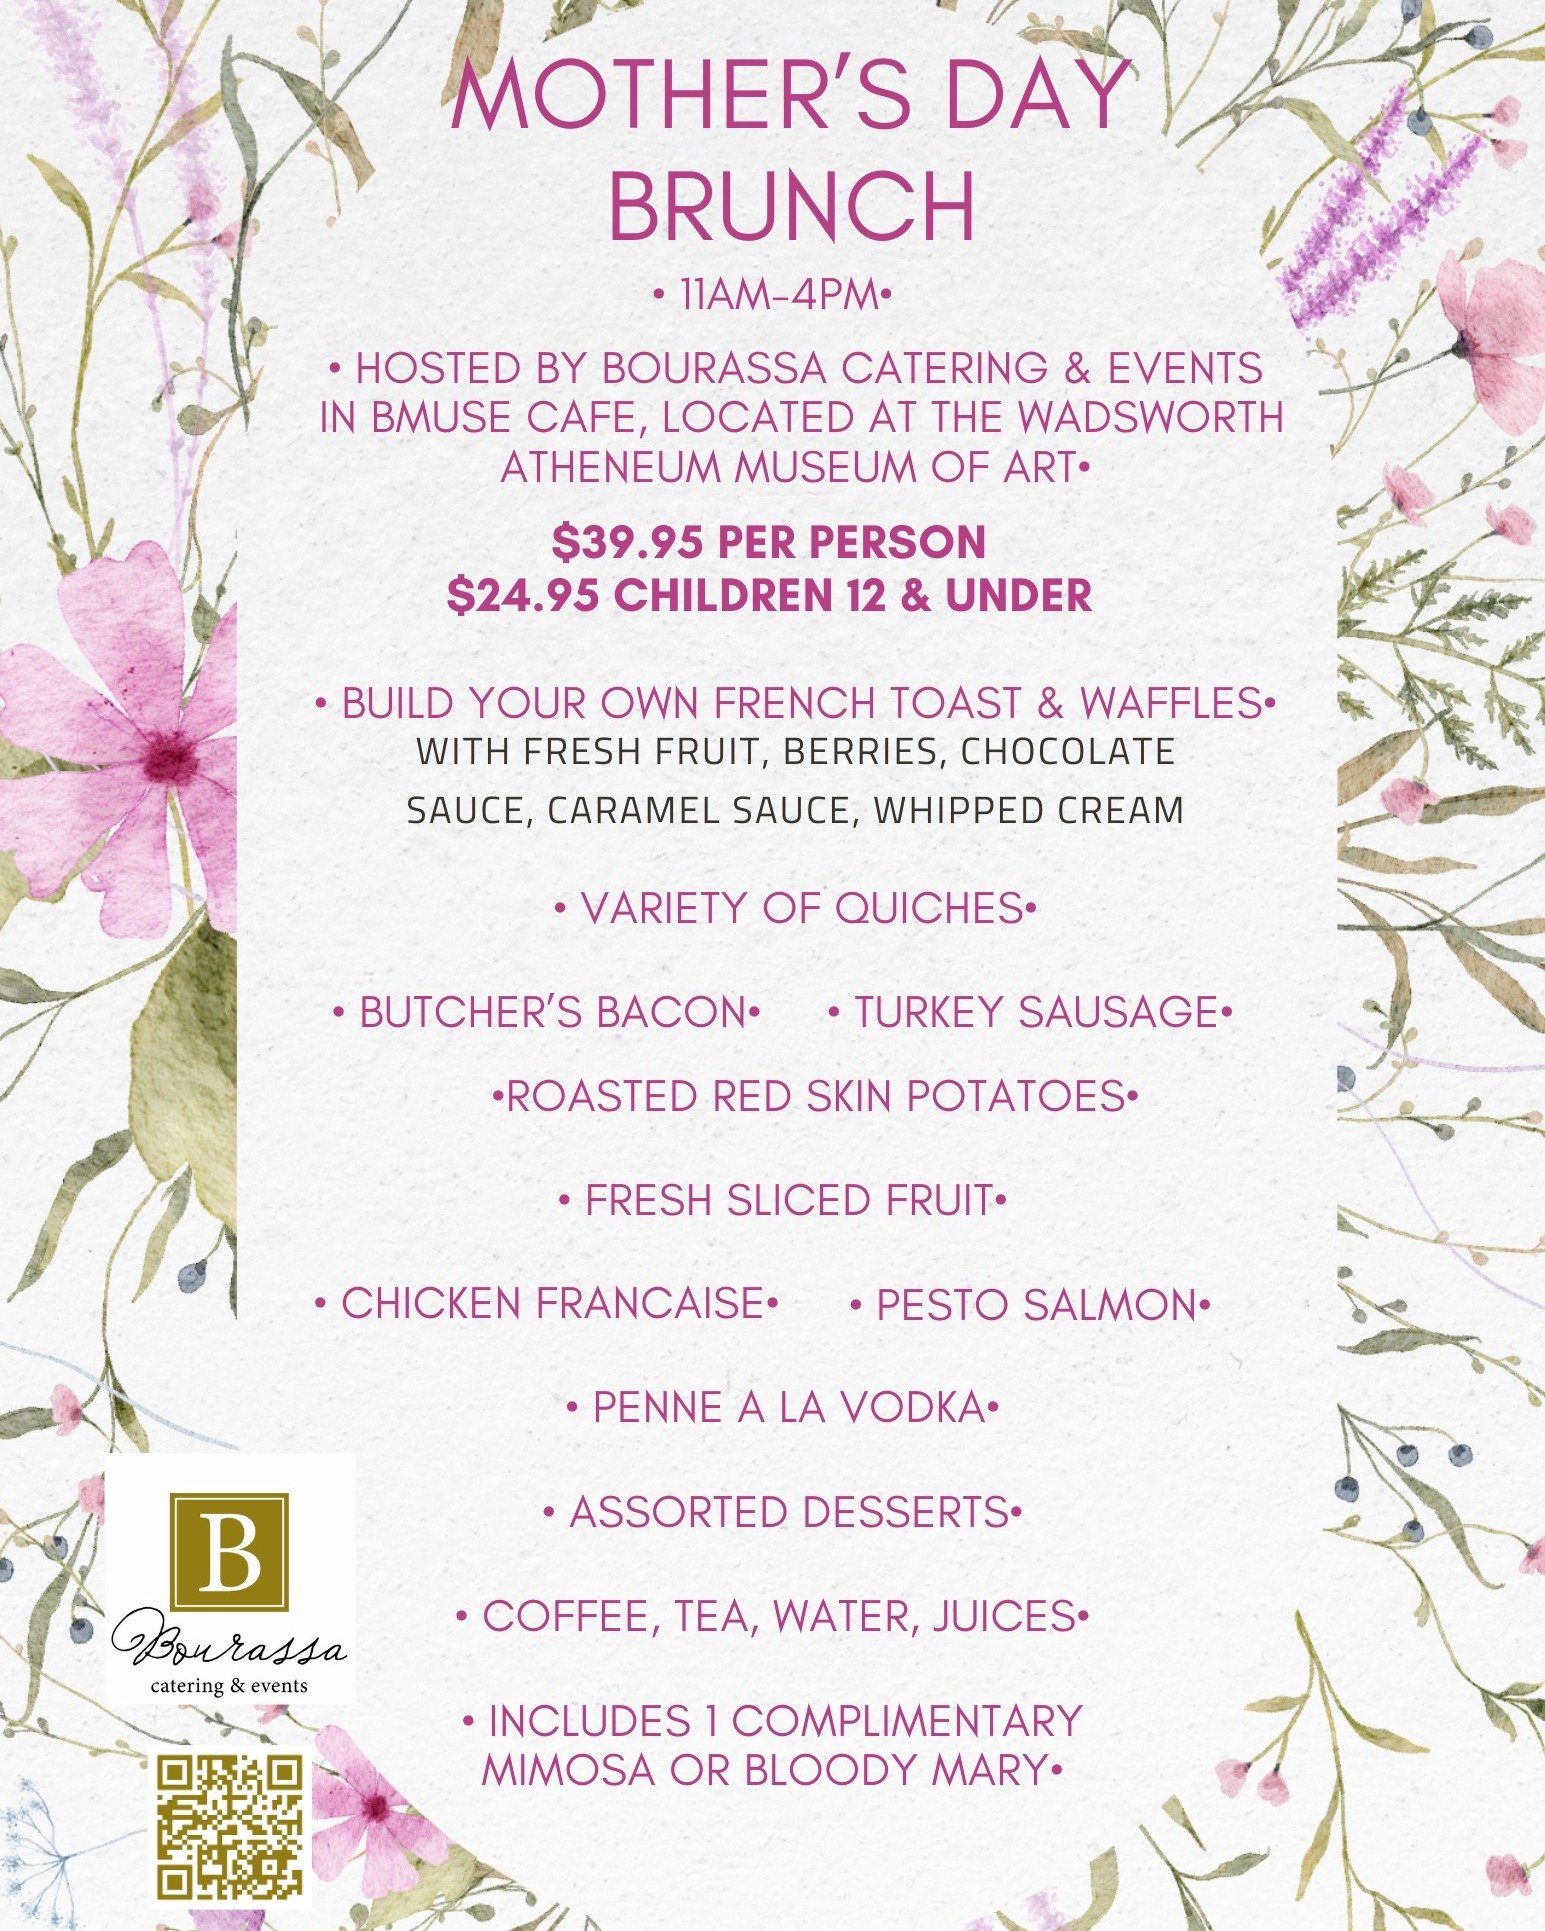 Come celebrate MOM!  Today 11-4 at @bmusecafe.hartford located in the @thewadsworth for a Mother's Day brunch buffet. Menu and pricing below.

And don't forget to grab tickets to join the @hgmcsing for their spring show!

#cheflife #foodie #bourassac